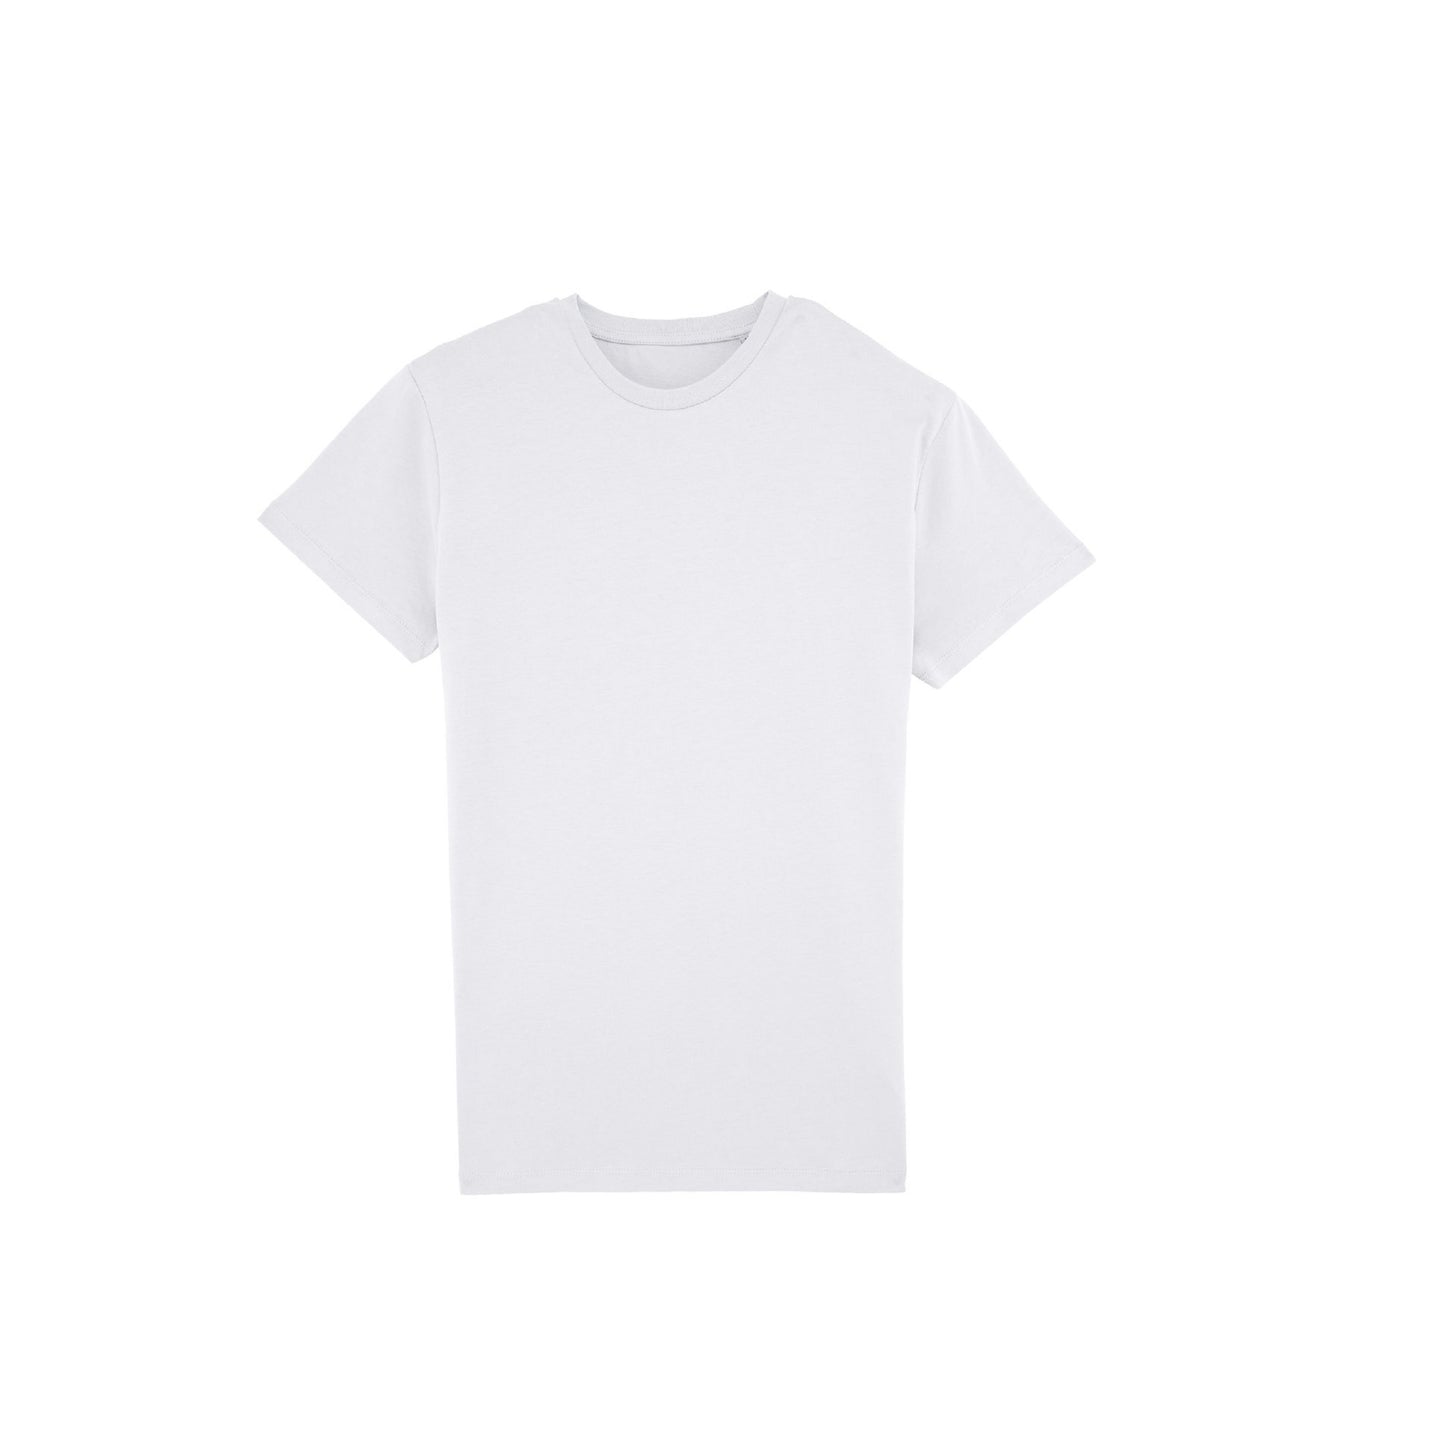 The Organic Cotton Men's Fitted T-Shirt